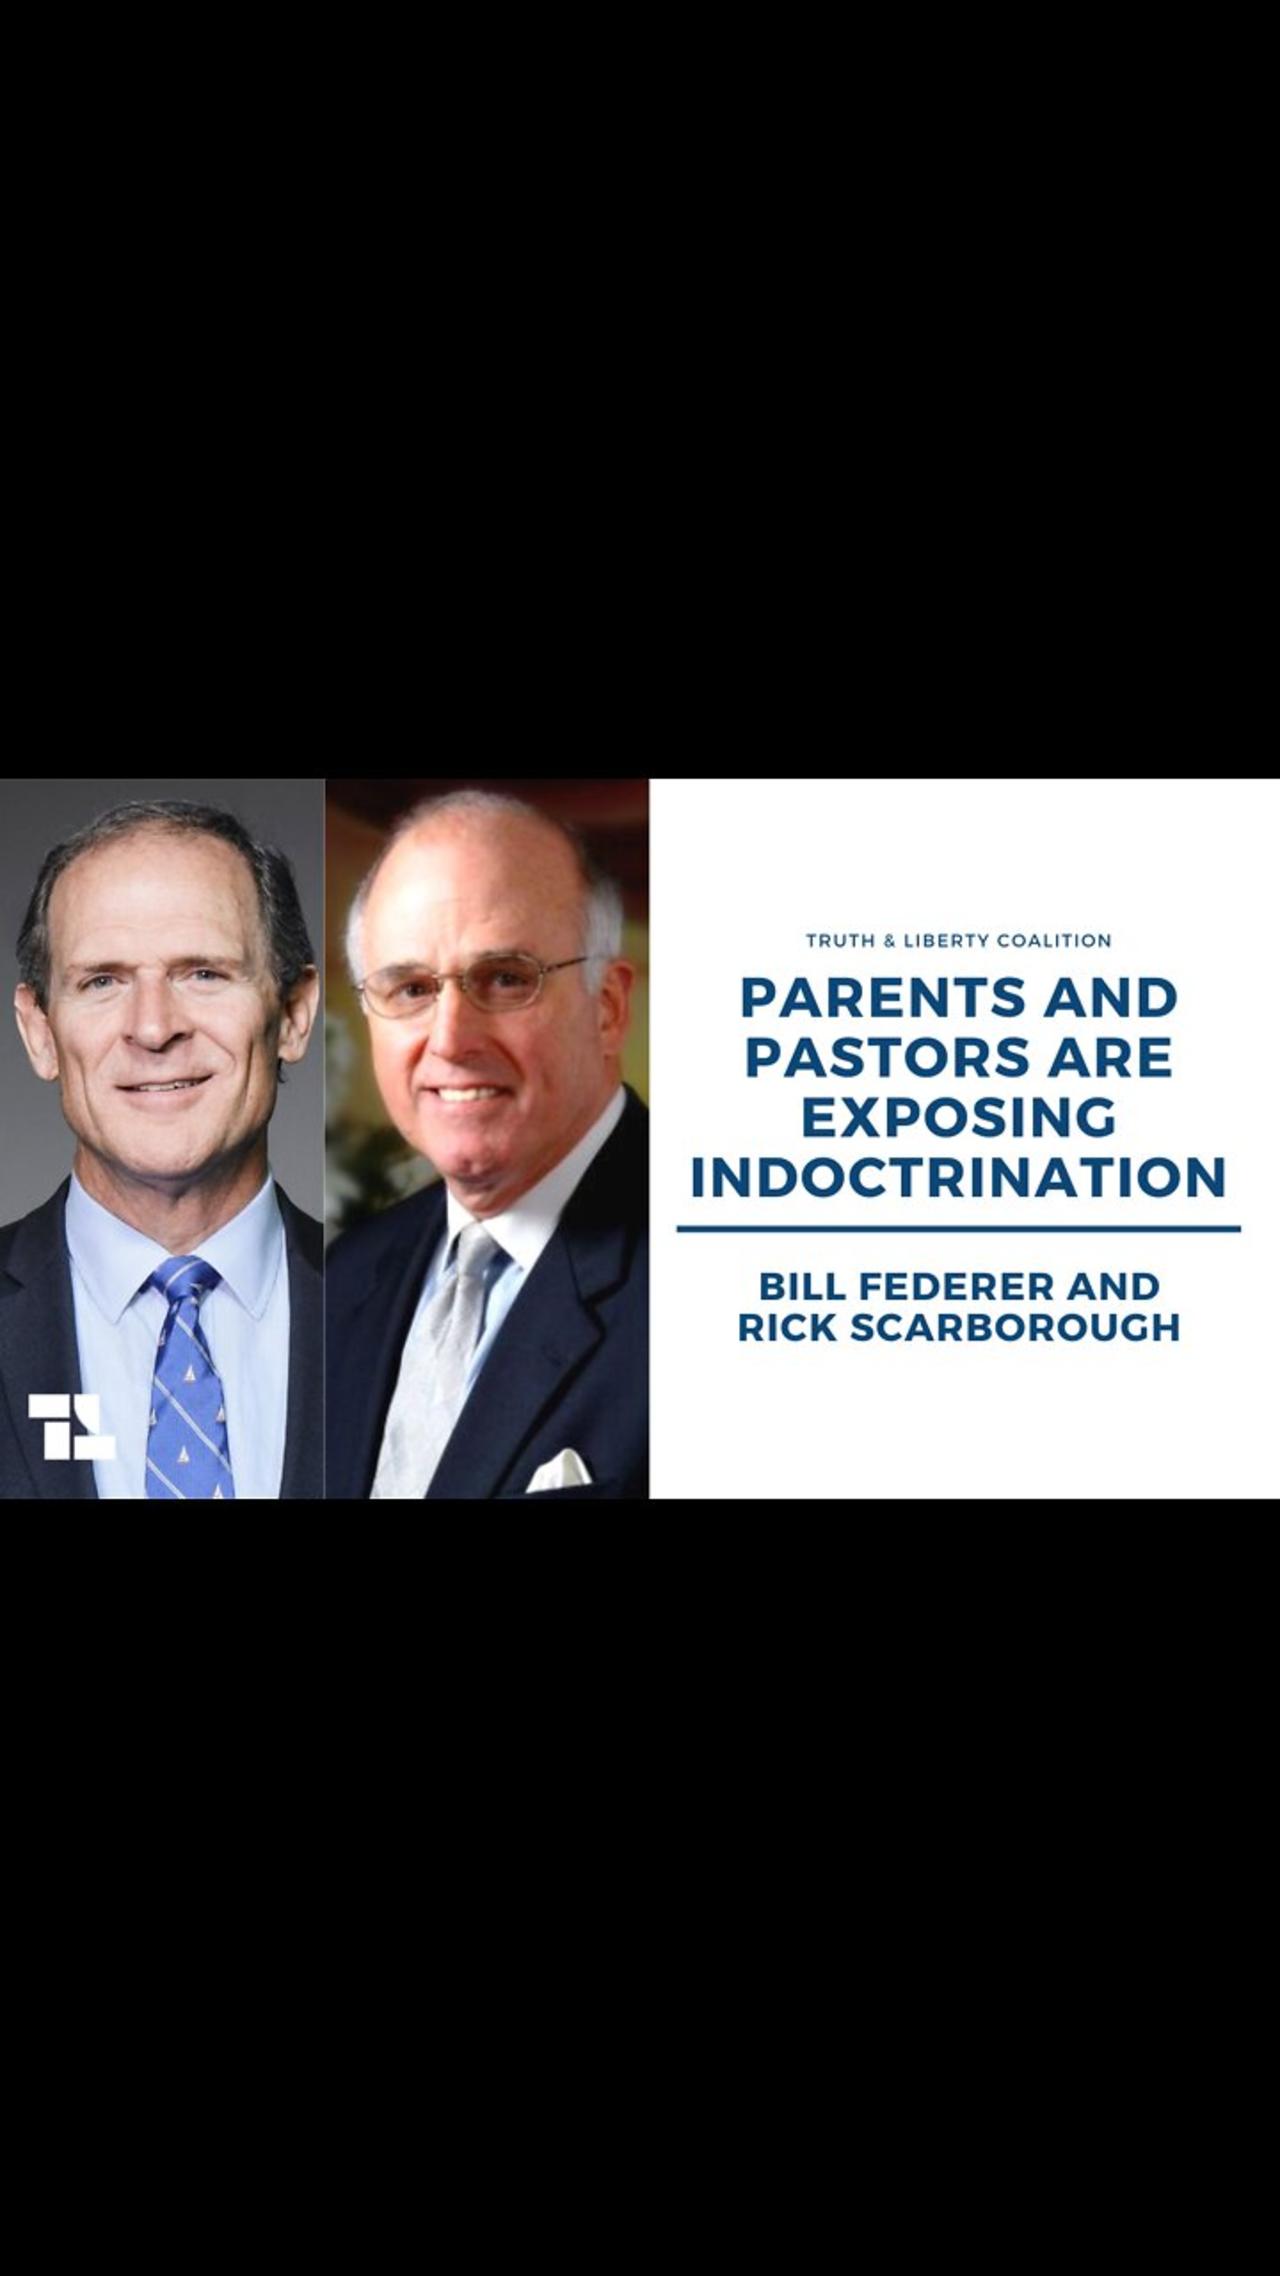 William J. "Bill" Federer and Rick Scarborough: Parents and Pastors Are Exposing Indoctrination